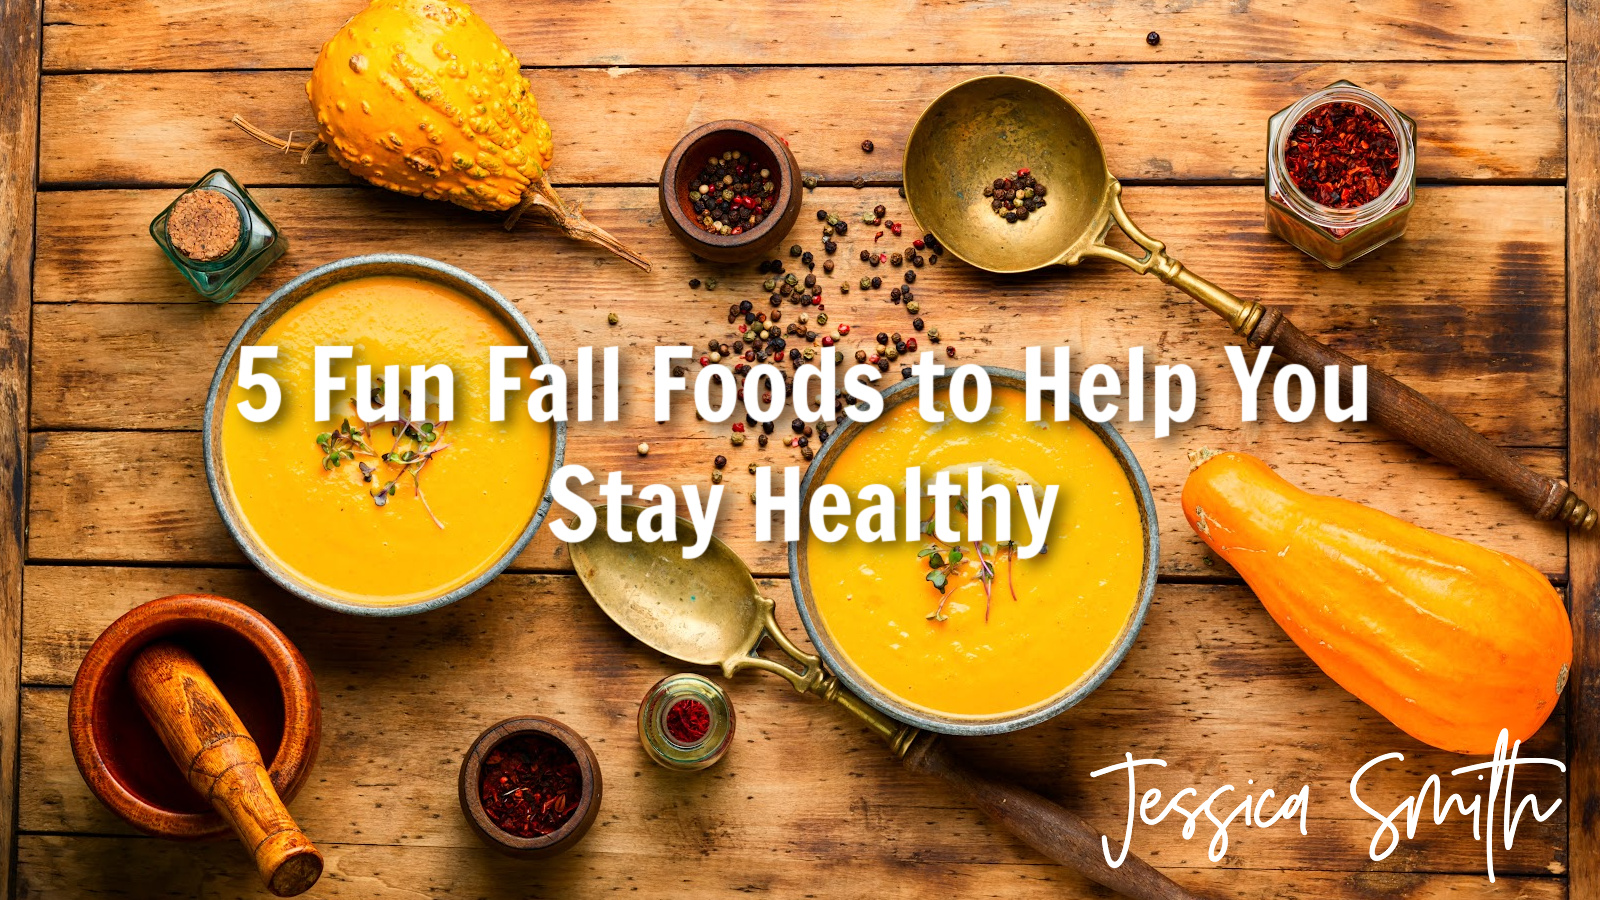 5 Fun Fall Foods That Help You Stay Healthy (Plus 3 Simple Seasonal Recipes to Try!)